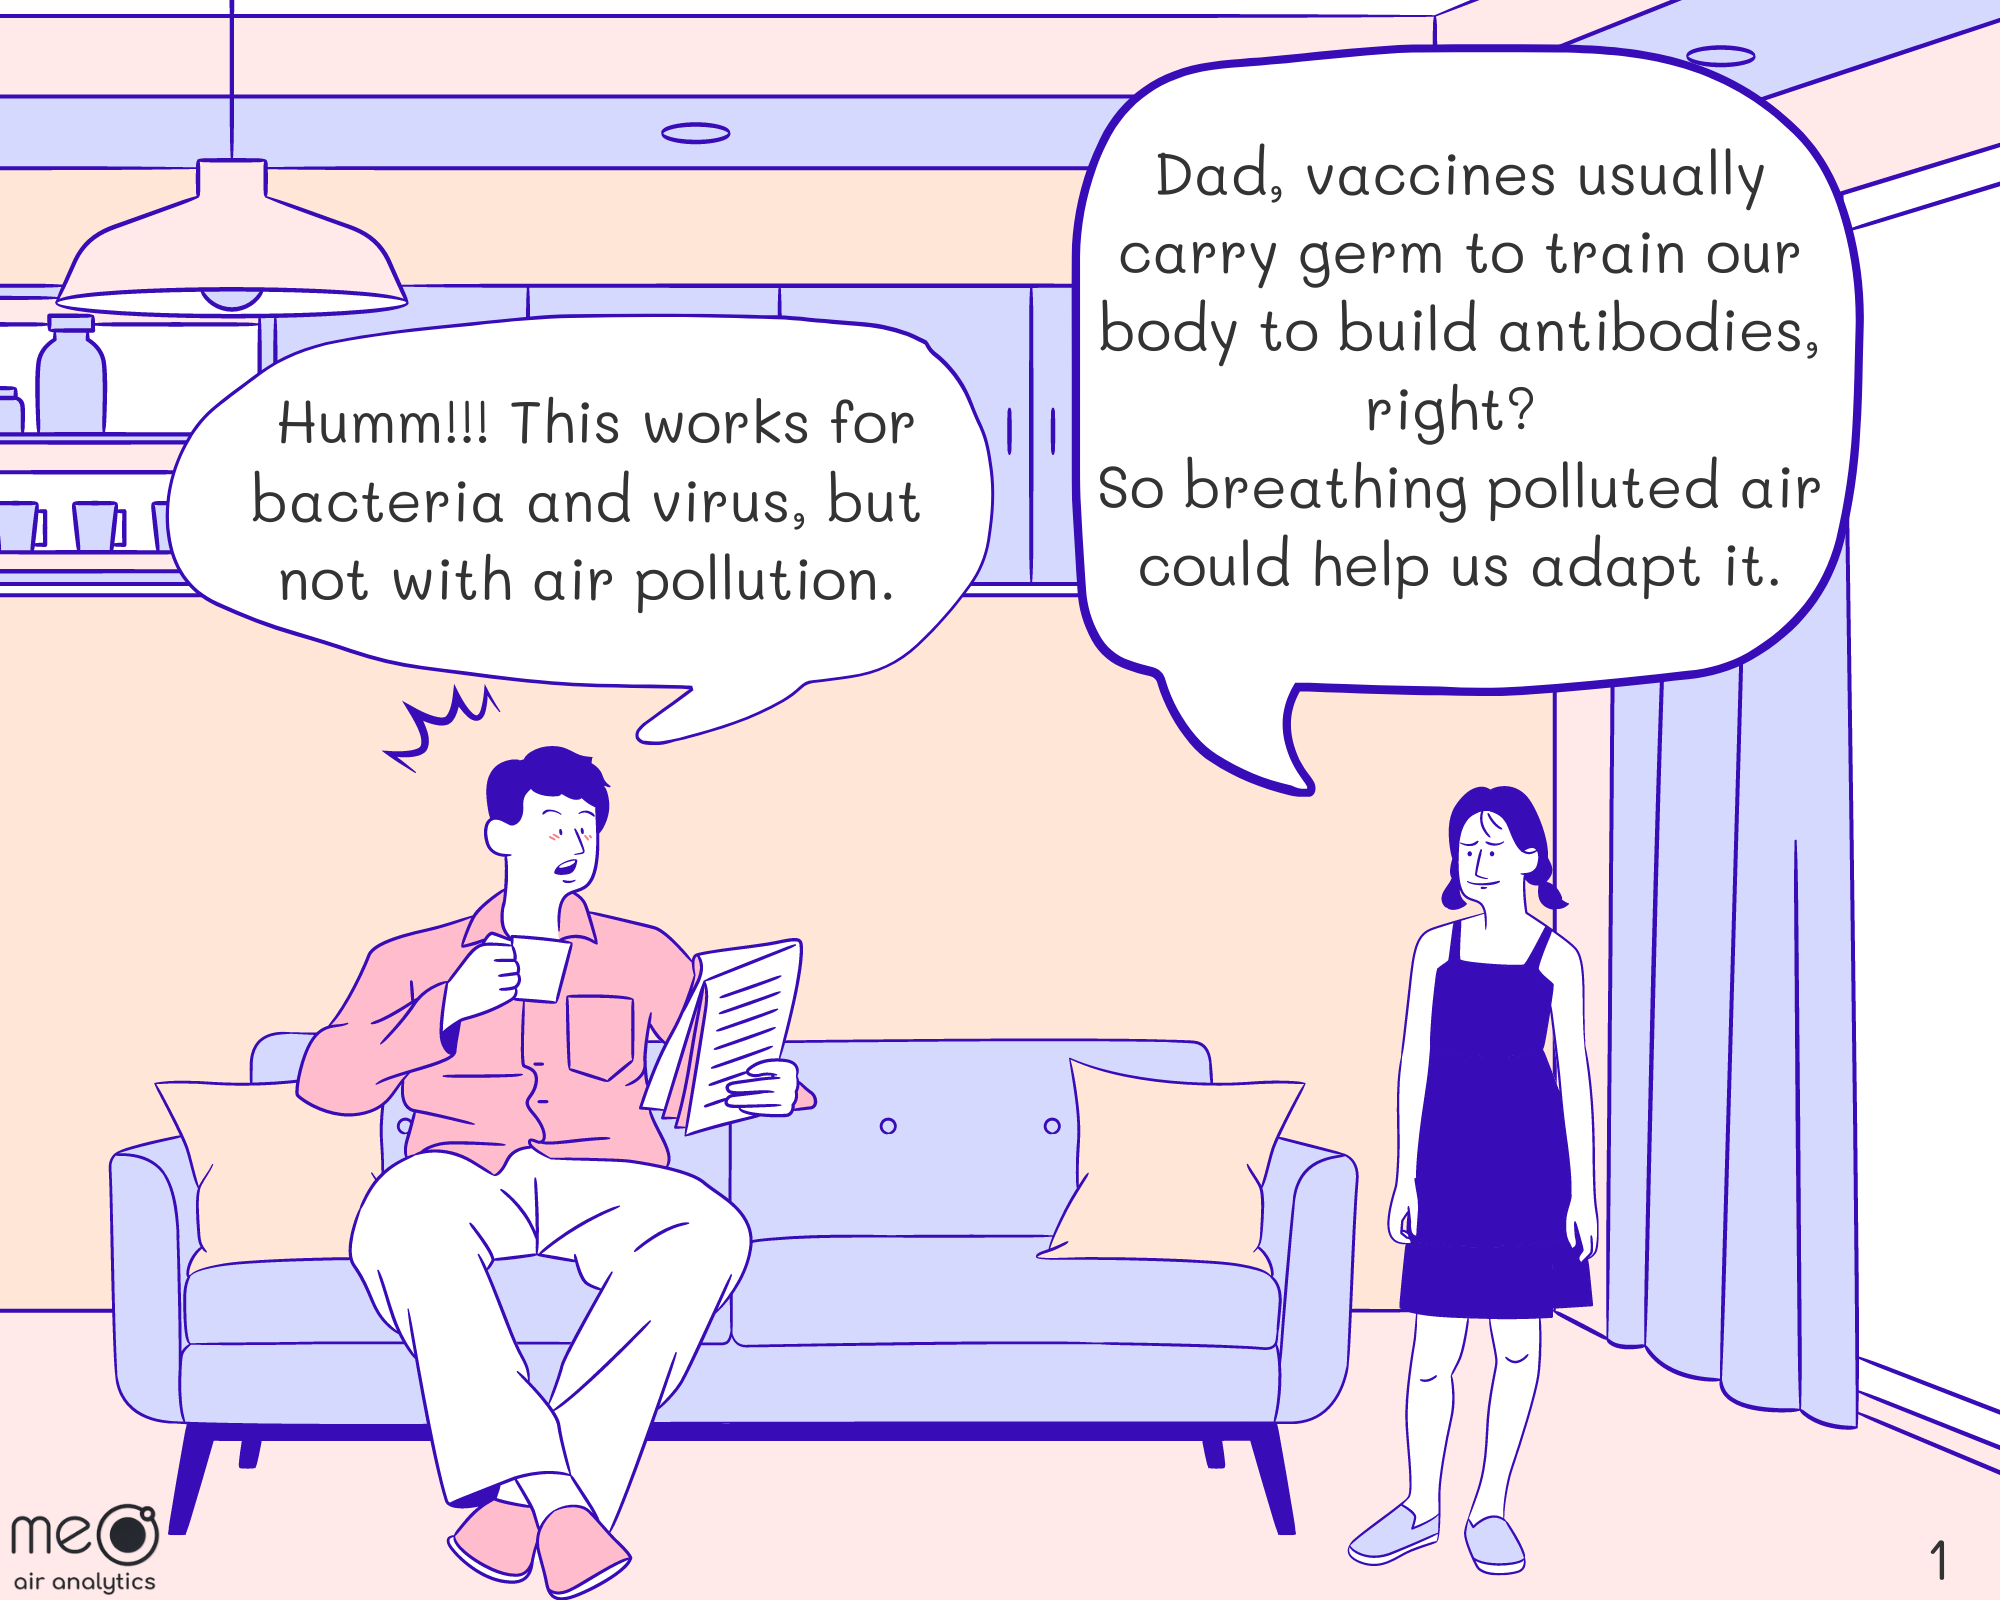 Kid: Dad, vaccines usually carry germ to train our body to build antibodies, right? In the same way, breathing polluted air could help us adapt to it.
Dad: Humm!!!  This works for bacteria and virus, but not with air pollution.